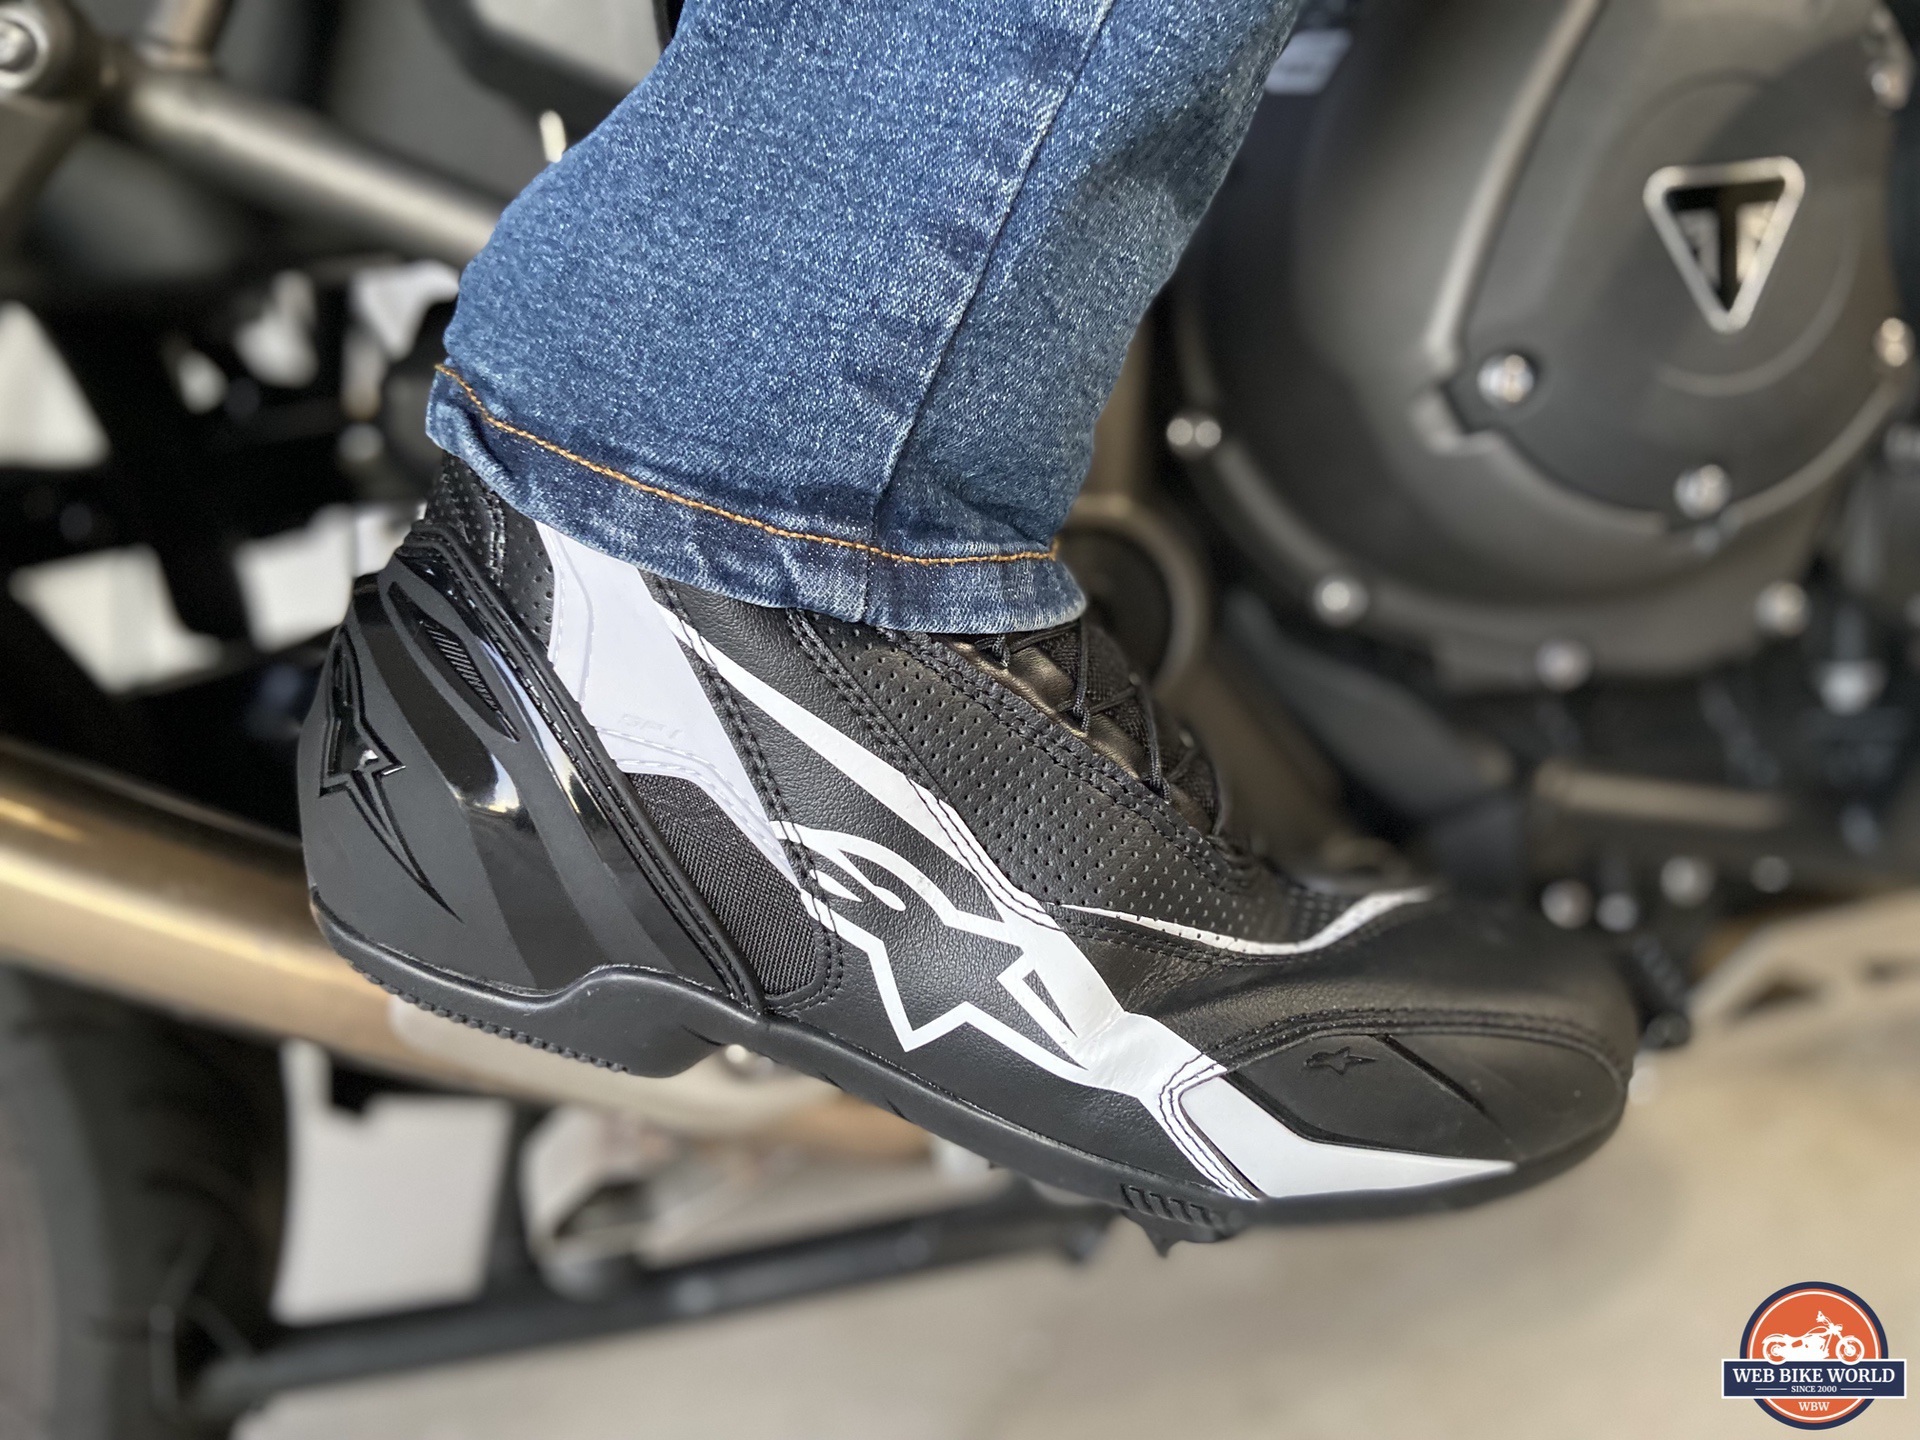 Author wearing Alpinestars SP-1 V2 Vented Shoes on motorcycle